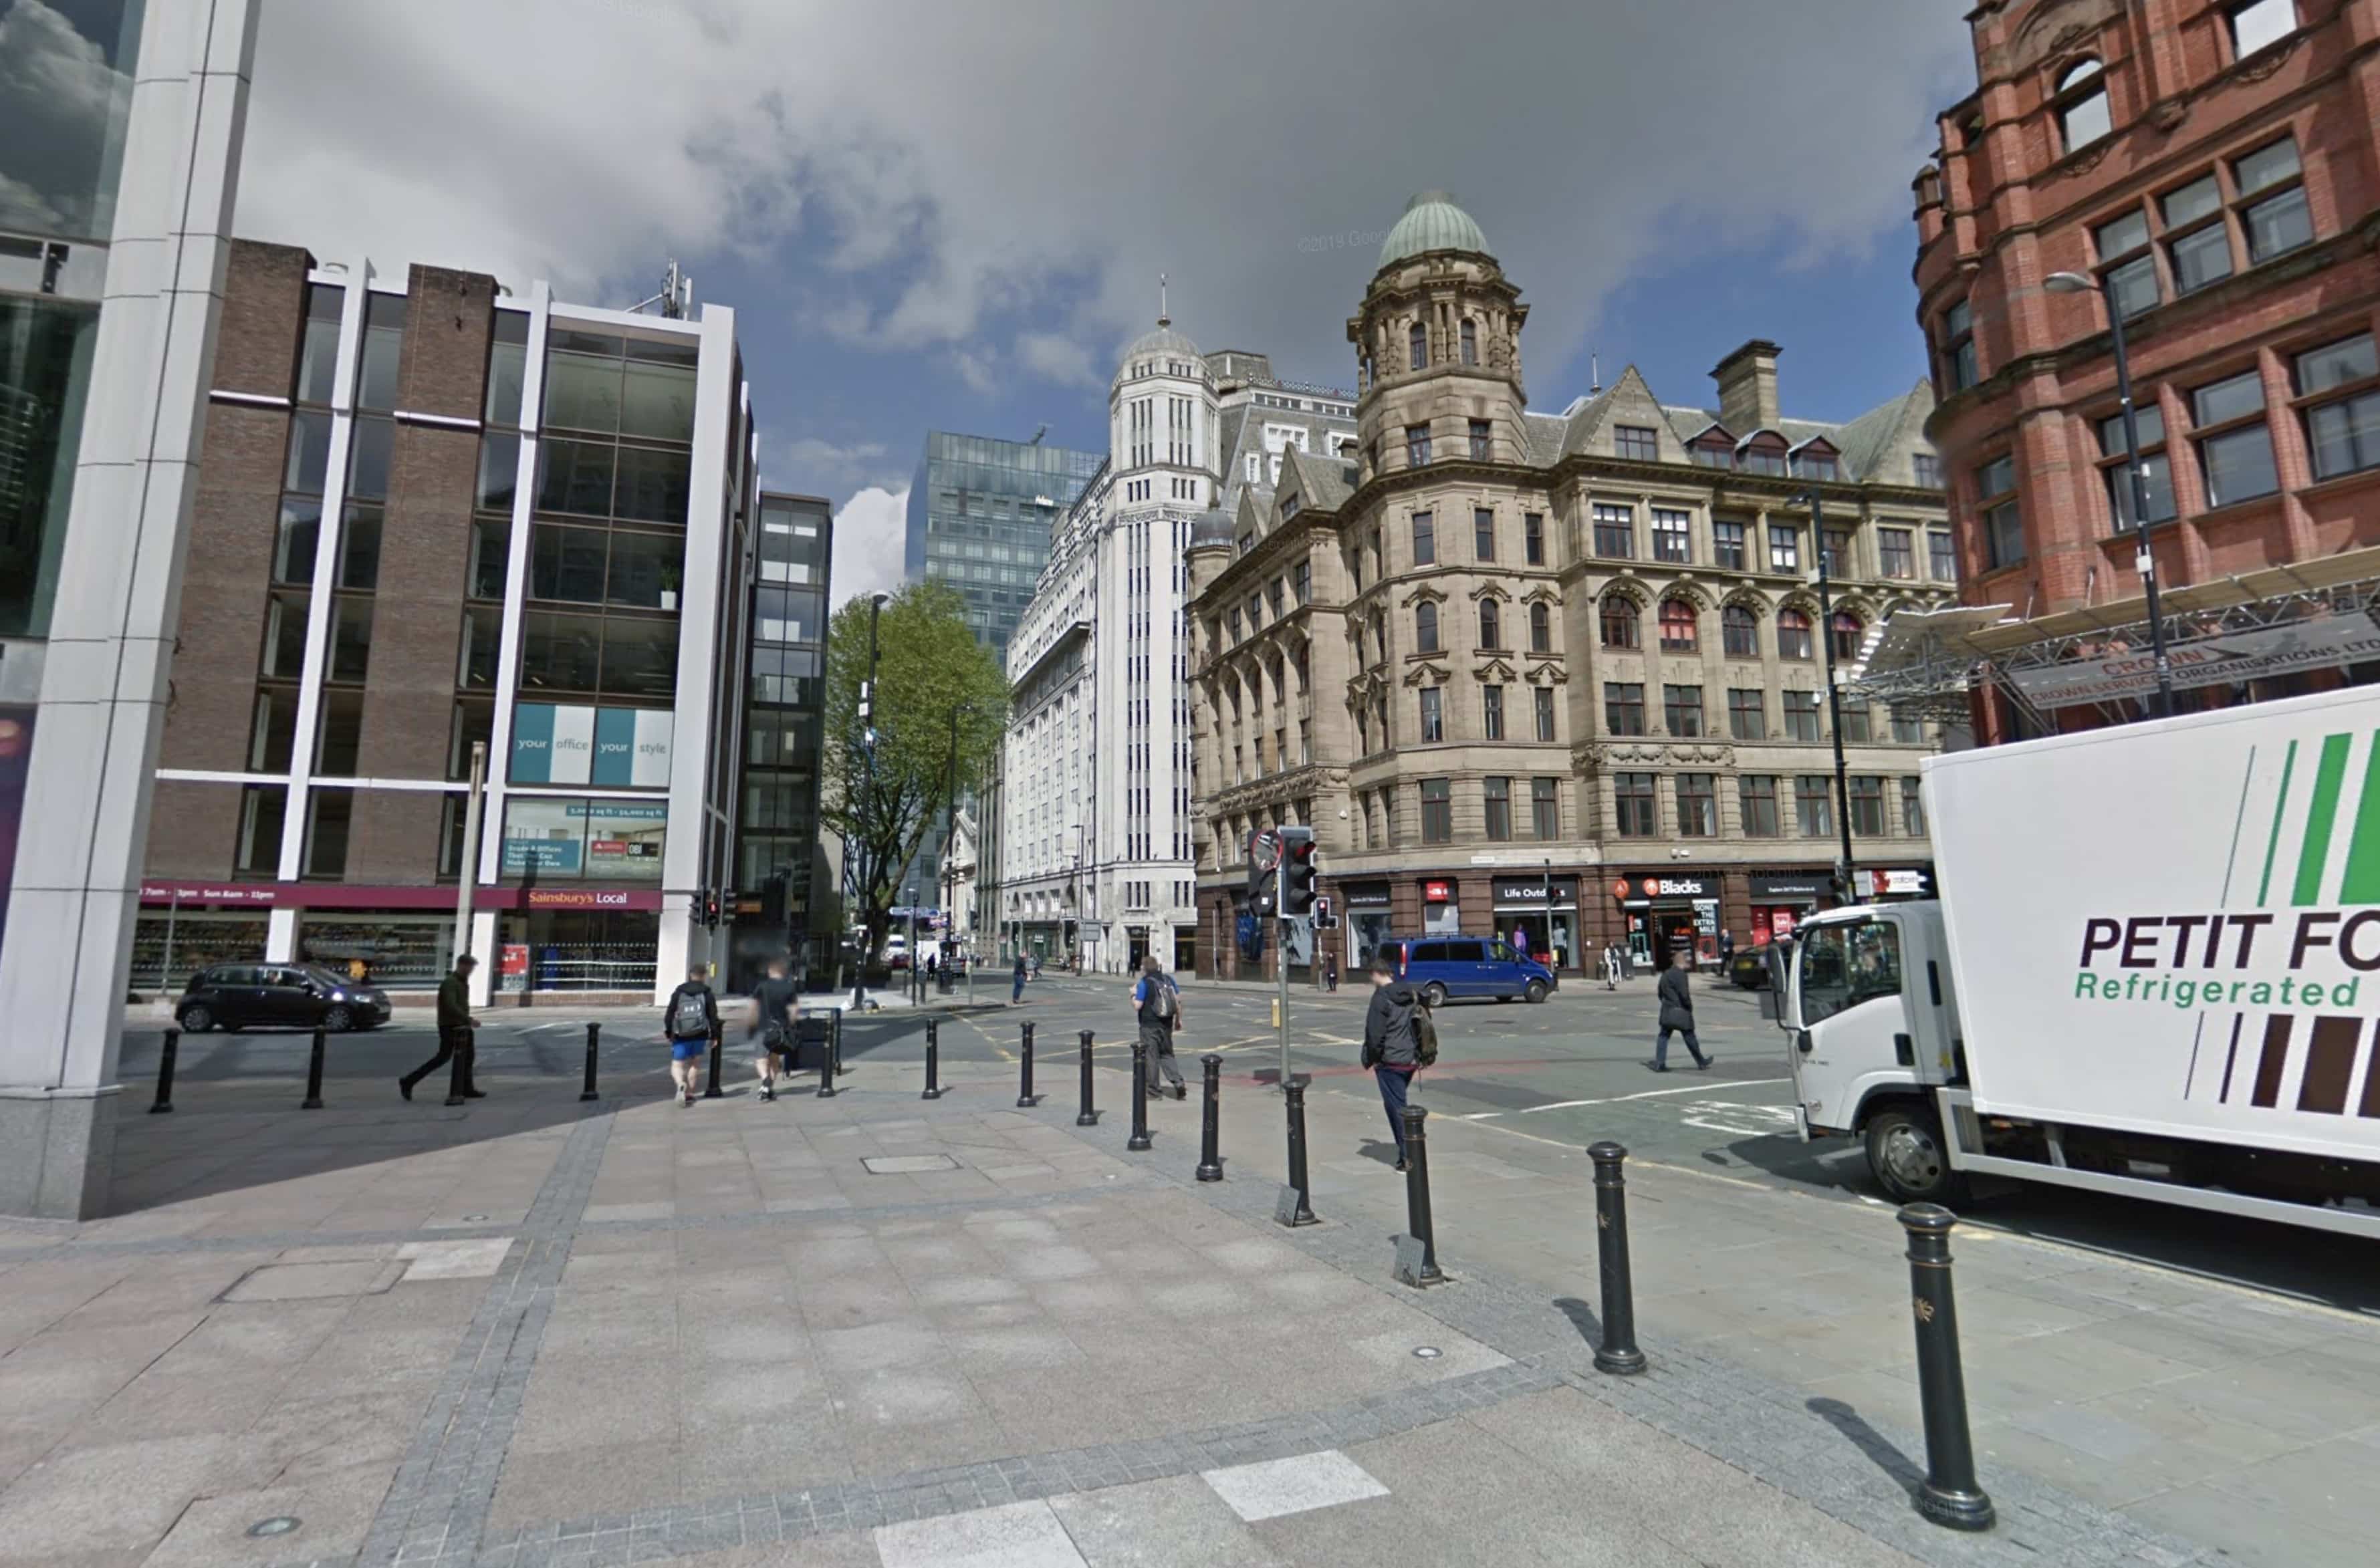 Great Northern Square in Manchester. Photo from Google Maps